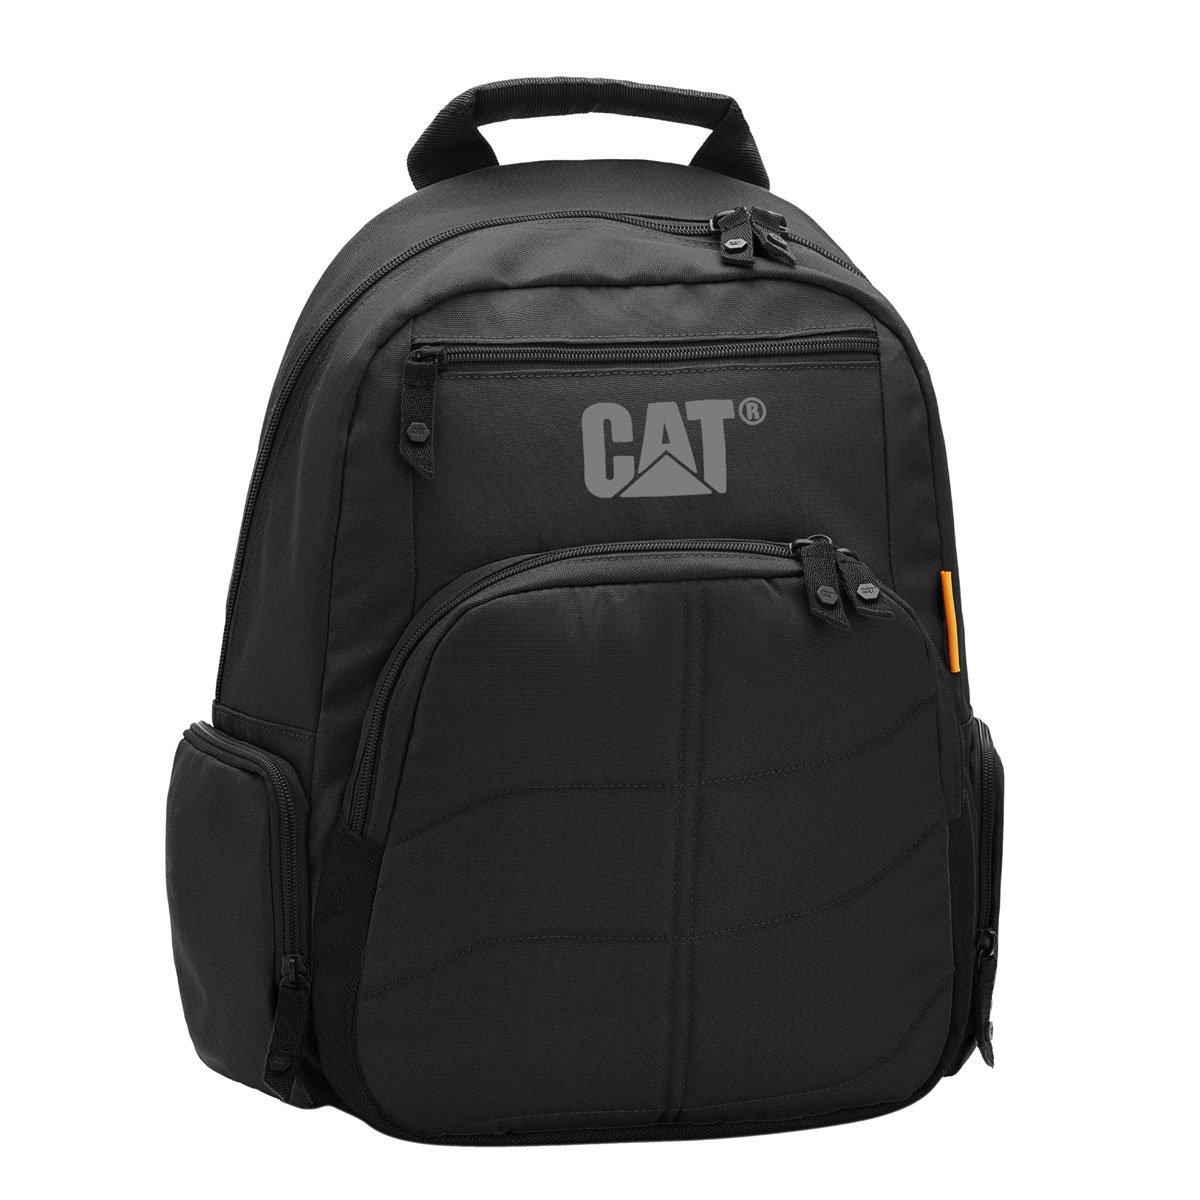 Paquete Laptop Hp 14-Al012 Backpack Mouse y Cuaderno